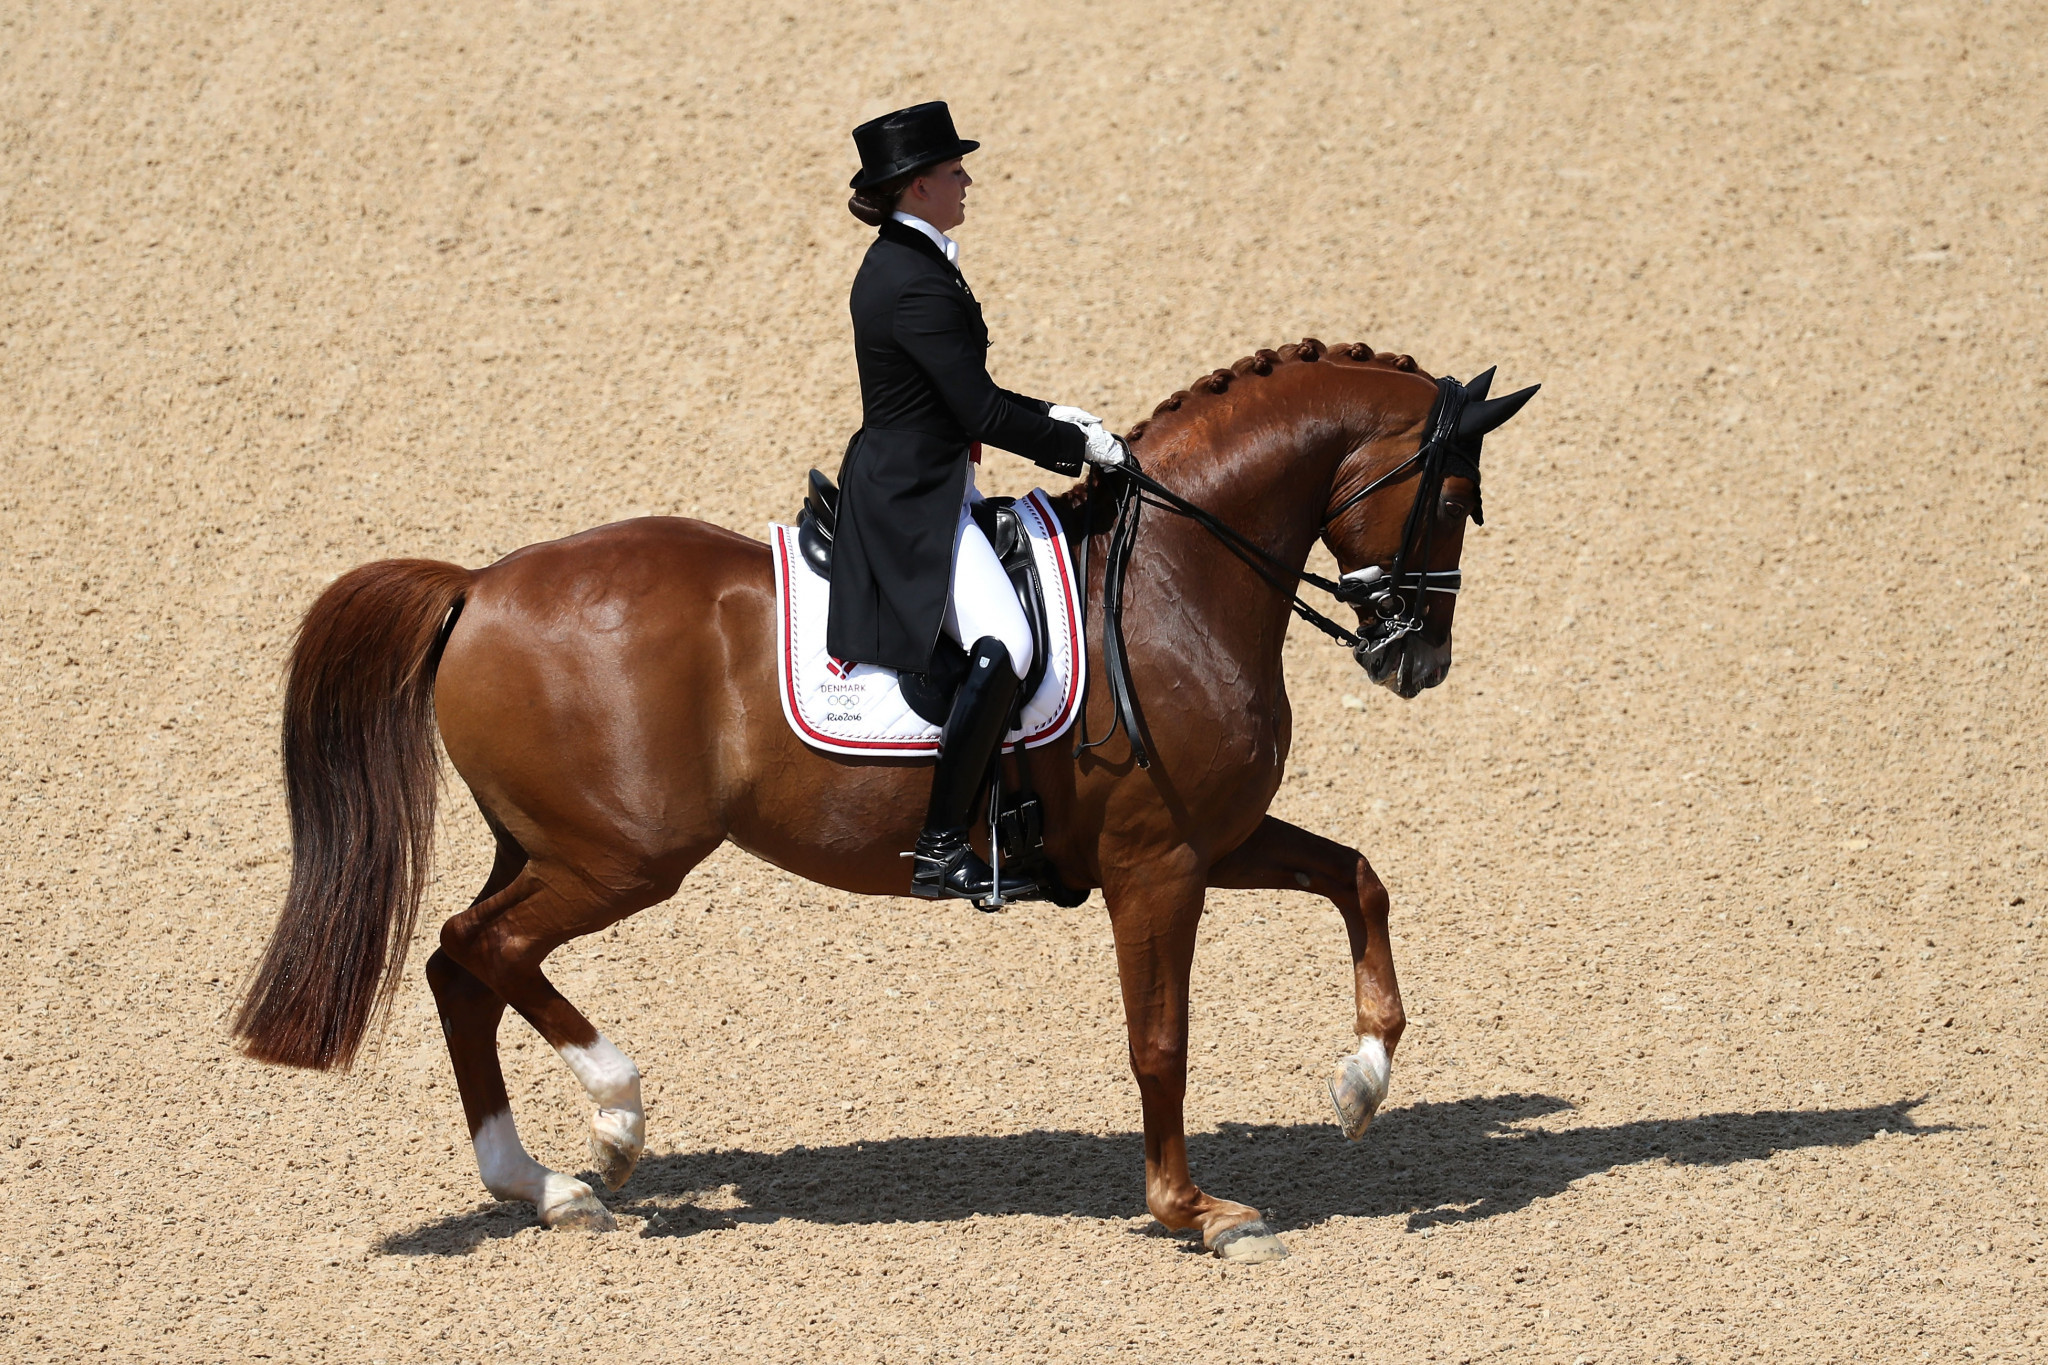 Denmark's Cathrine Dufour helped her country lead the FEI Dressage Nations Cup event in Uggerhalne ©Getty Images